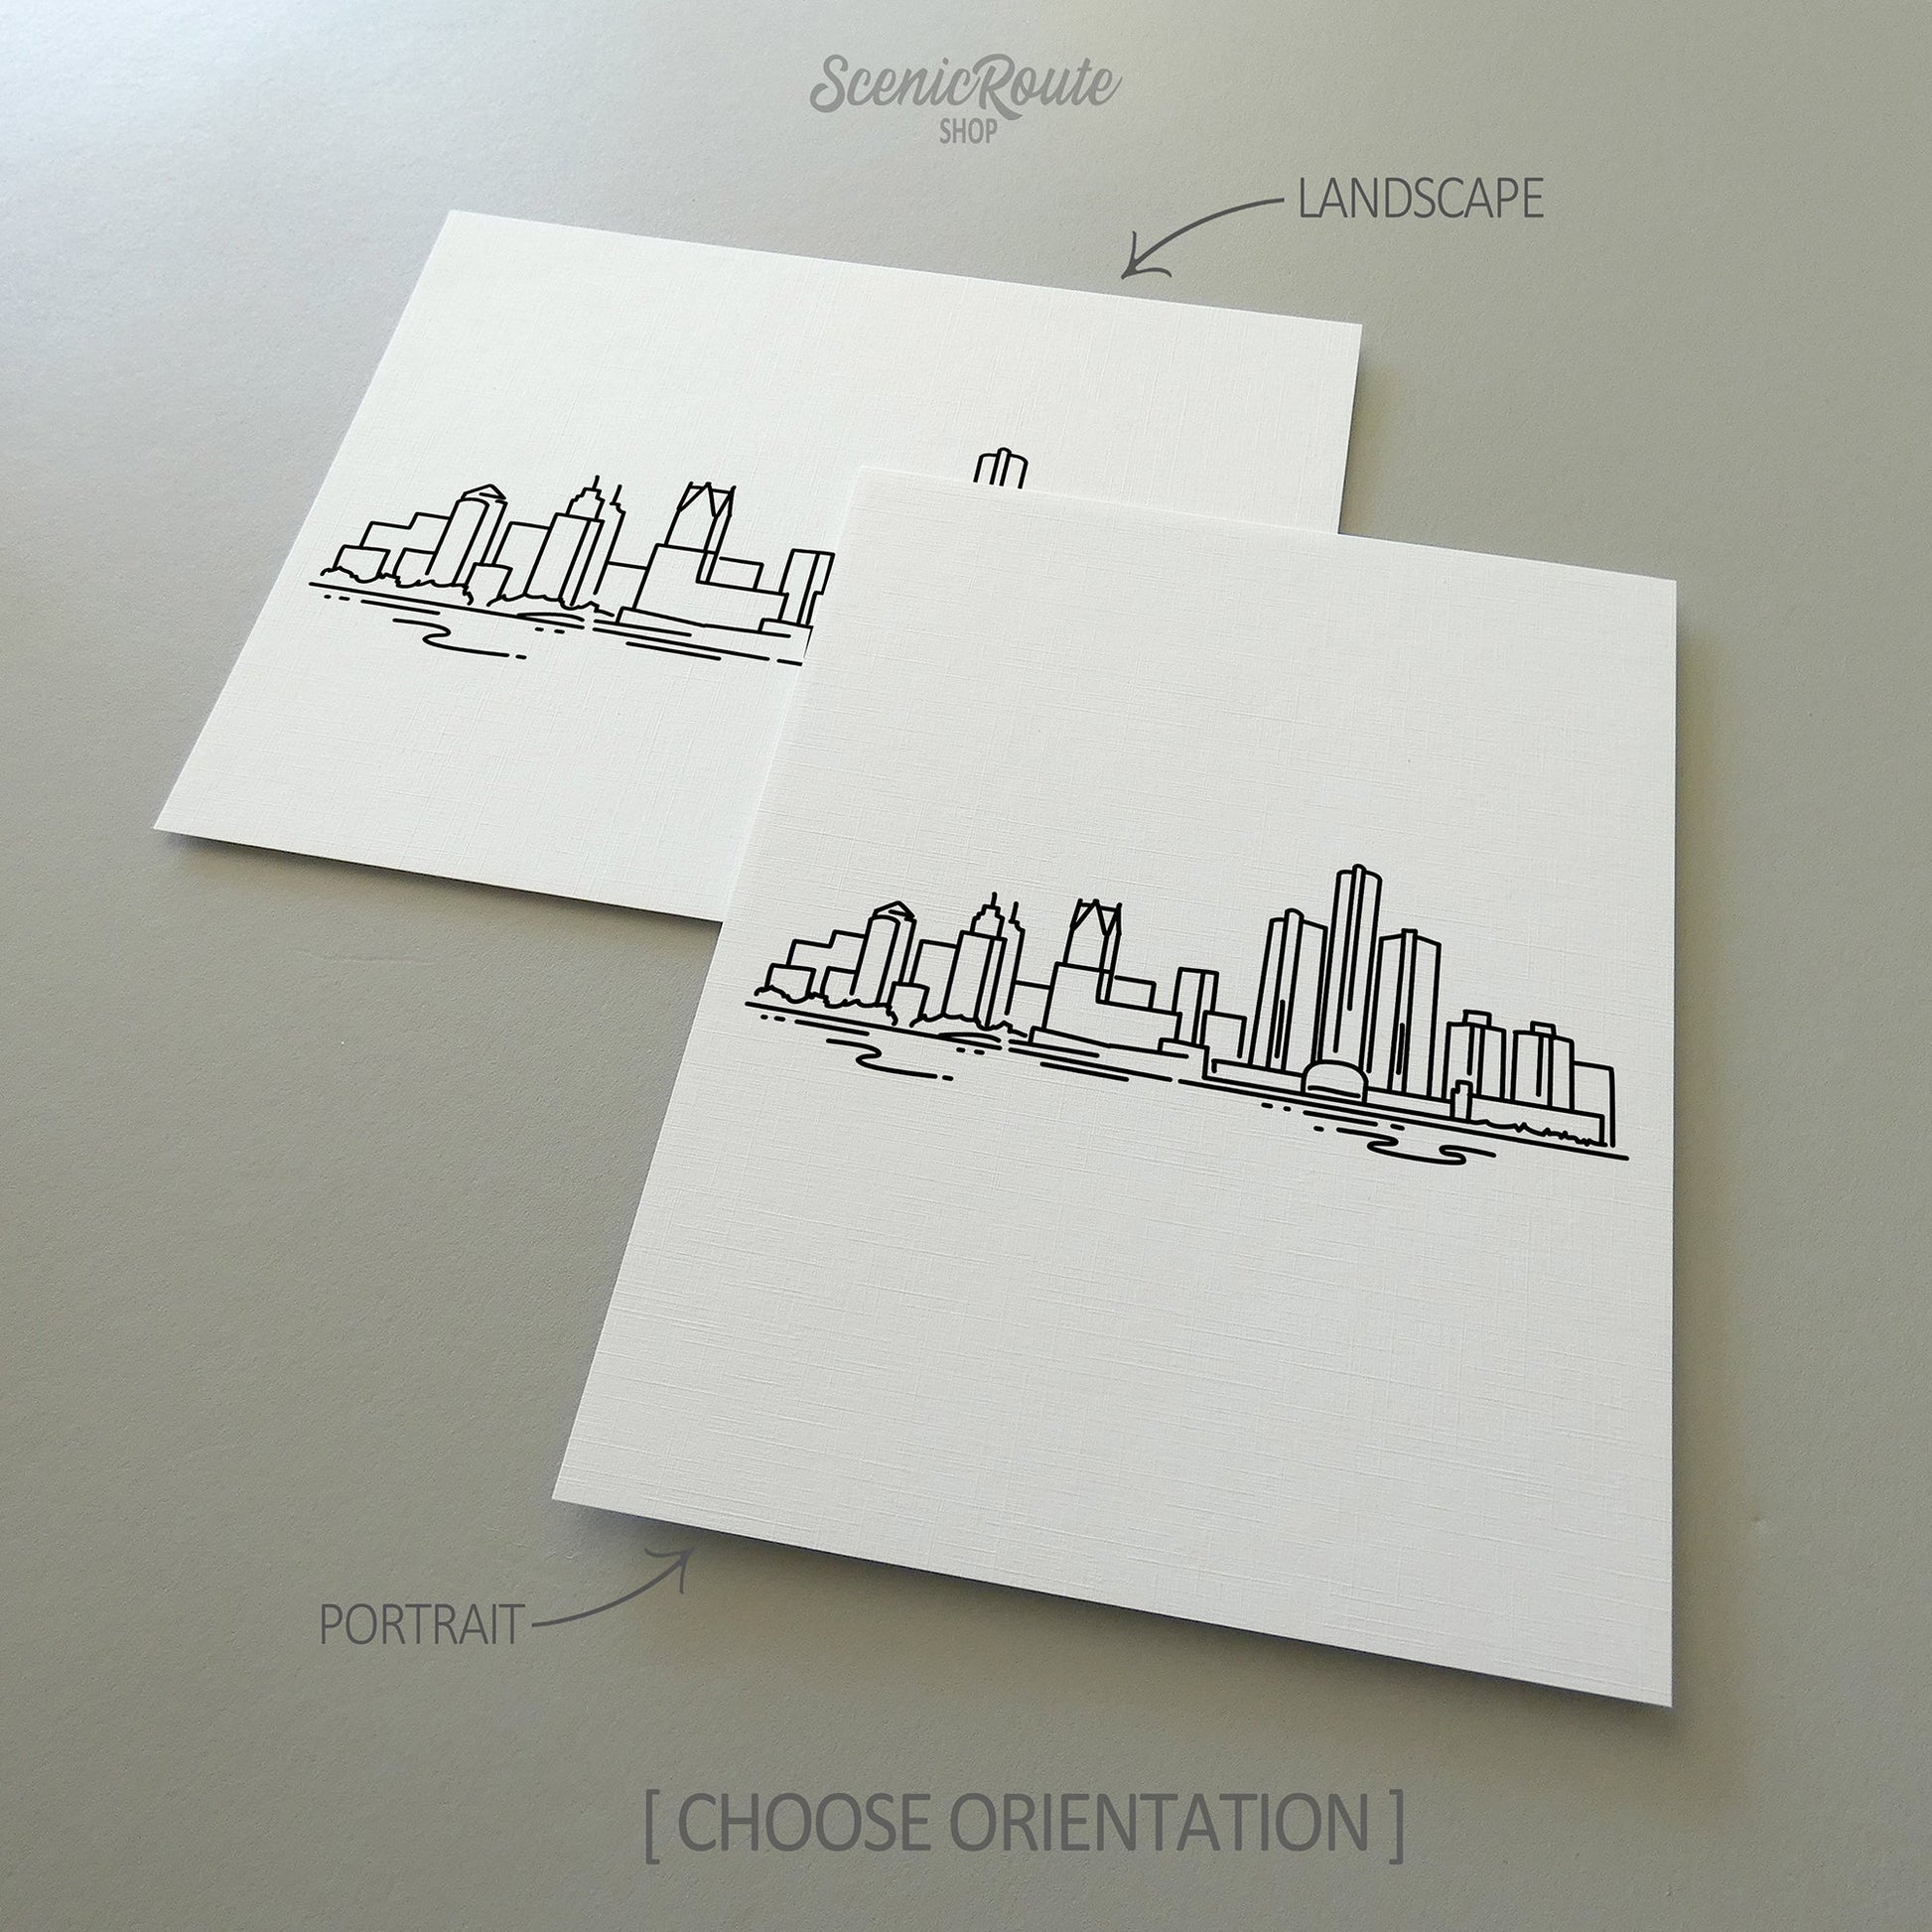 Two line art drawings of the Detroit Skyline on white linen paper with a gray background.  The pieces are shown in portrait and landscape orientation for the available art print options.